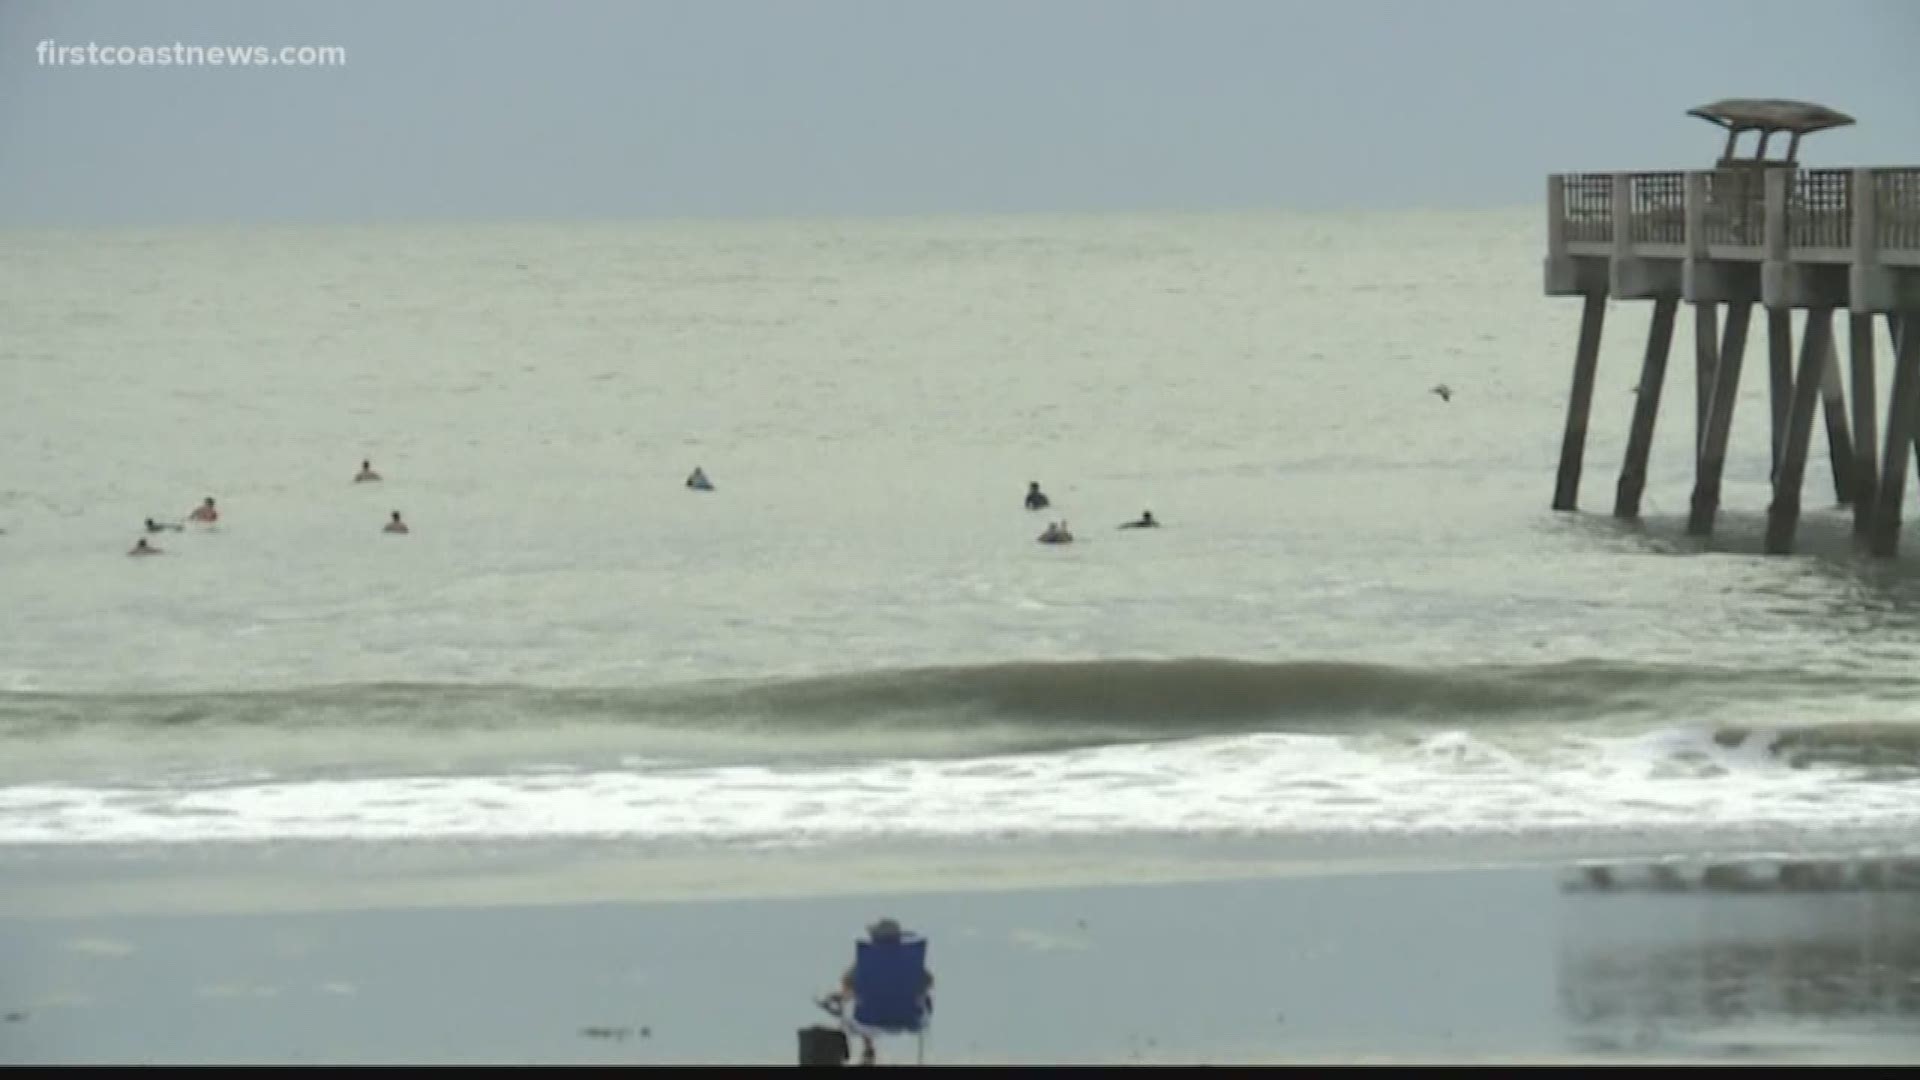 Even with a precautionary swim advisory issued for all Duval County beaches, surfers are taking advantage of the post-Dorian waves at Jacksonville Beach.